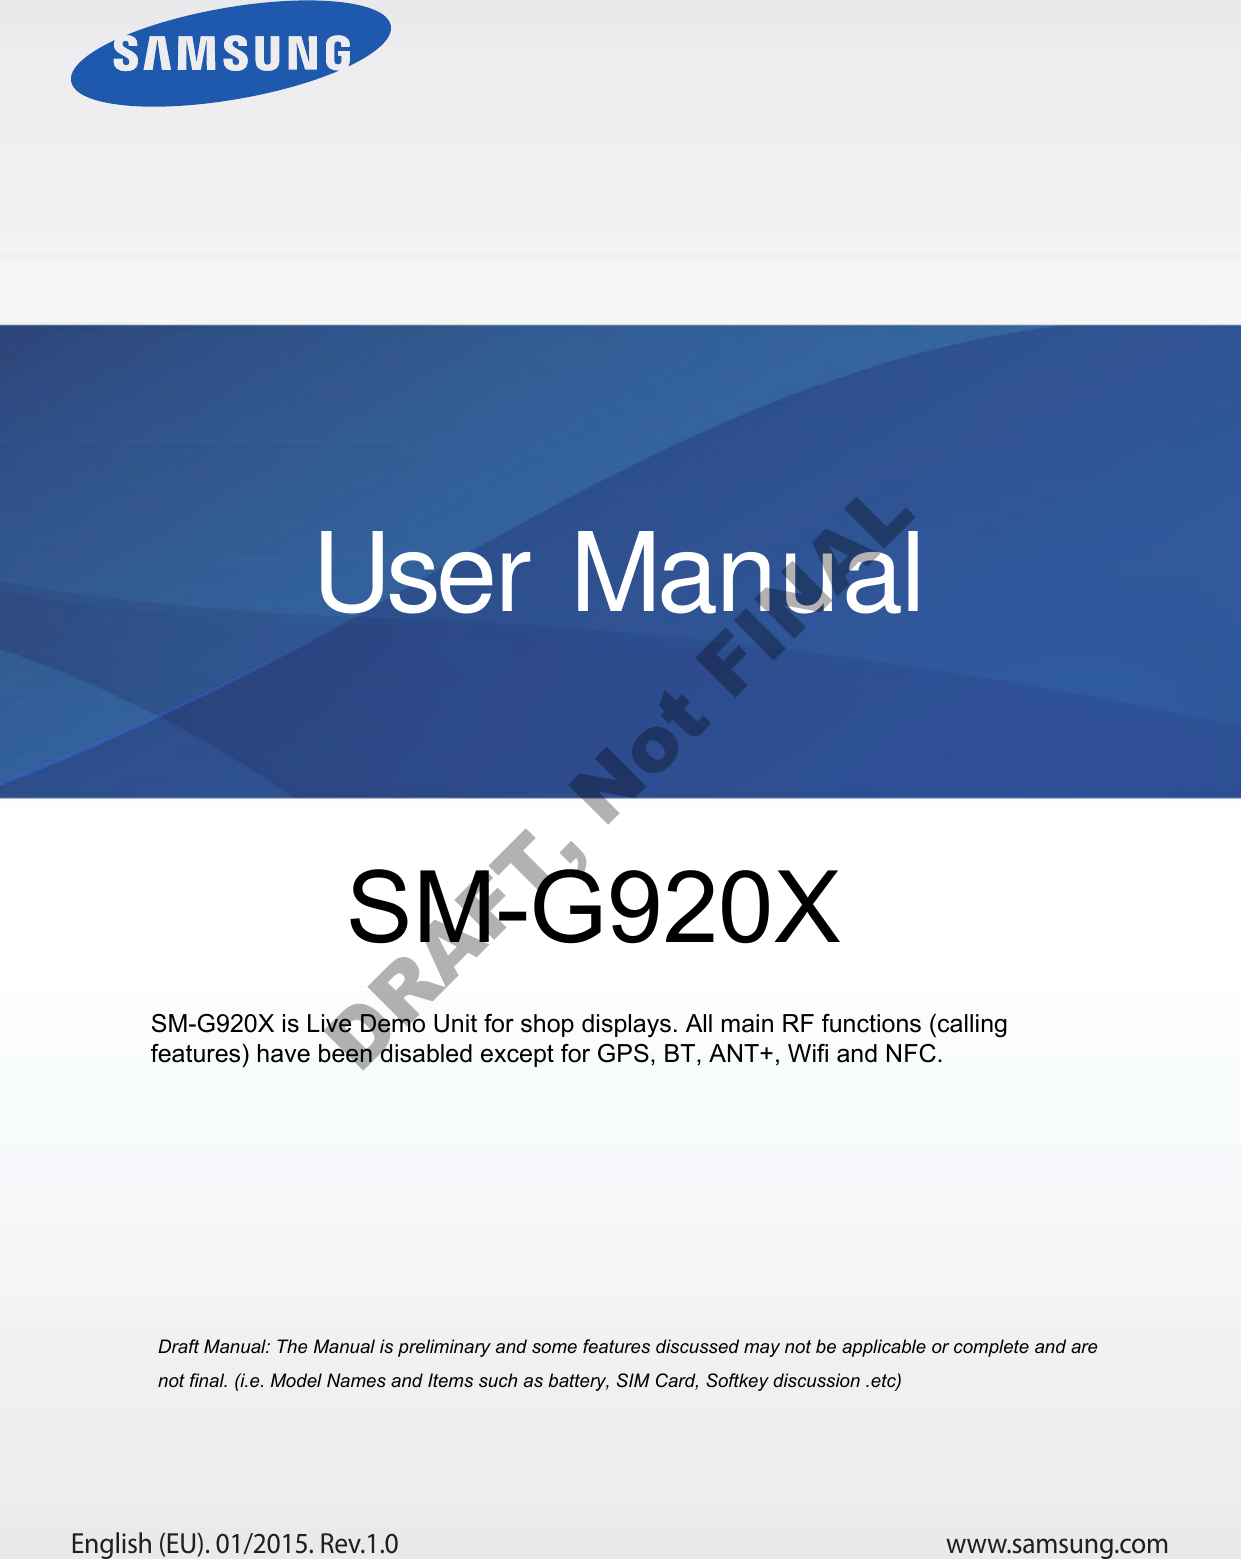 www.samsung.comUser ManualEnglish (EU). 01/2015. Rev.1.0a ana  ana  na and  a dd a n  aa   and a n na  d a and   a a  ad  dn SM-G920X SM-G920X is Live Demo Unit for shop displays. All main RF functions (calling features) have been disabled except for GPS, BT, ANT+, Wifi and NFC.DRAFT, Not FINAL